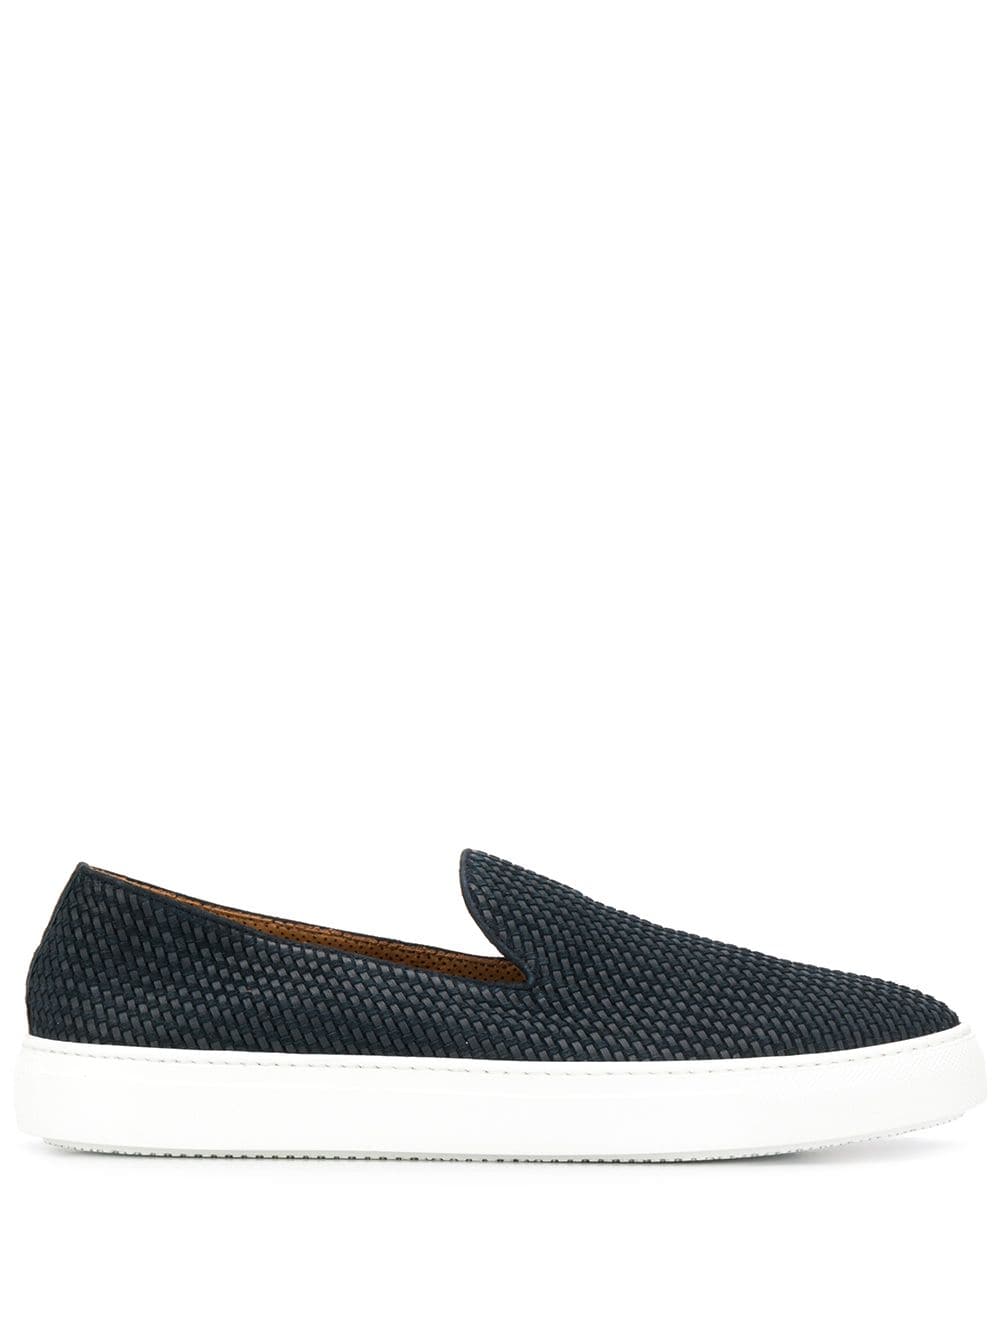 FRATELLI ROSSETTI WOVEN LEATHER LOAFERS